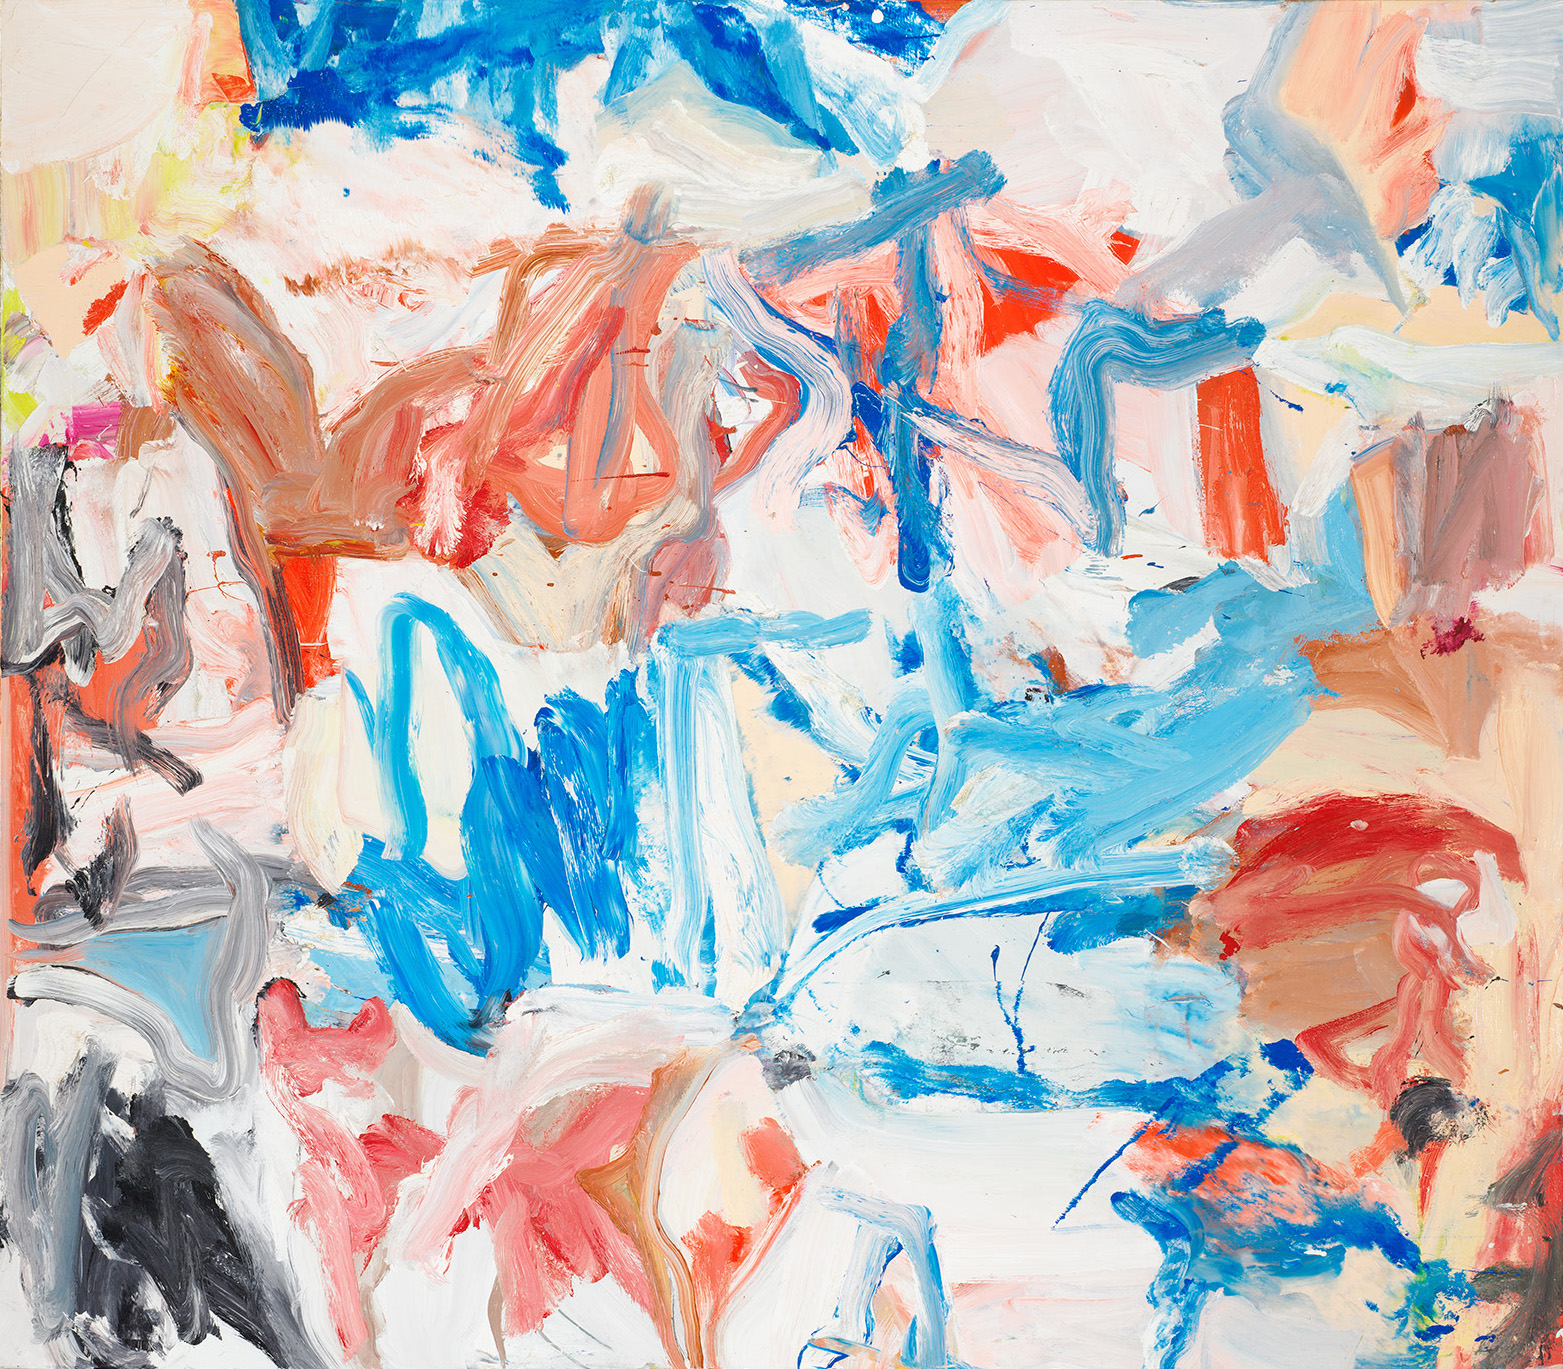 Willem de KooningScreams of Children Come from Seagulls (Untitled XX), 1975 olio su tela 195.6 x 223.5 cm Museo Glenstone Potomac, Maryland © 2024 The Willem de Kooning Foundation, SIAE